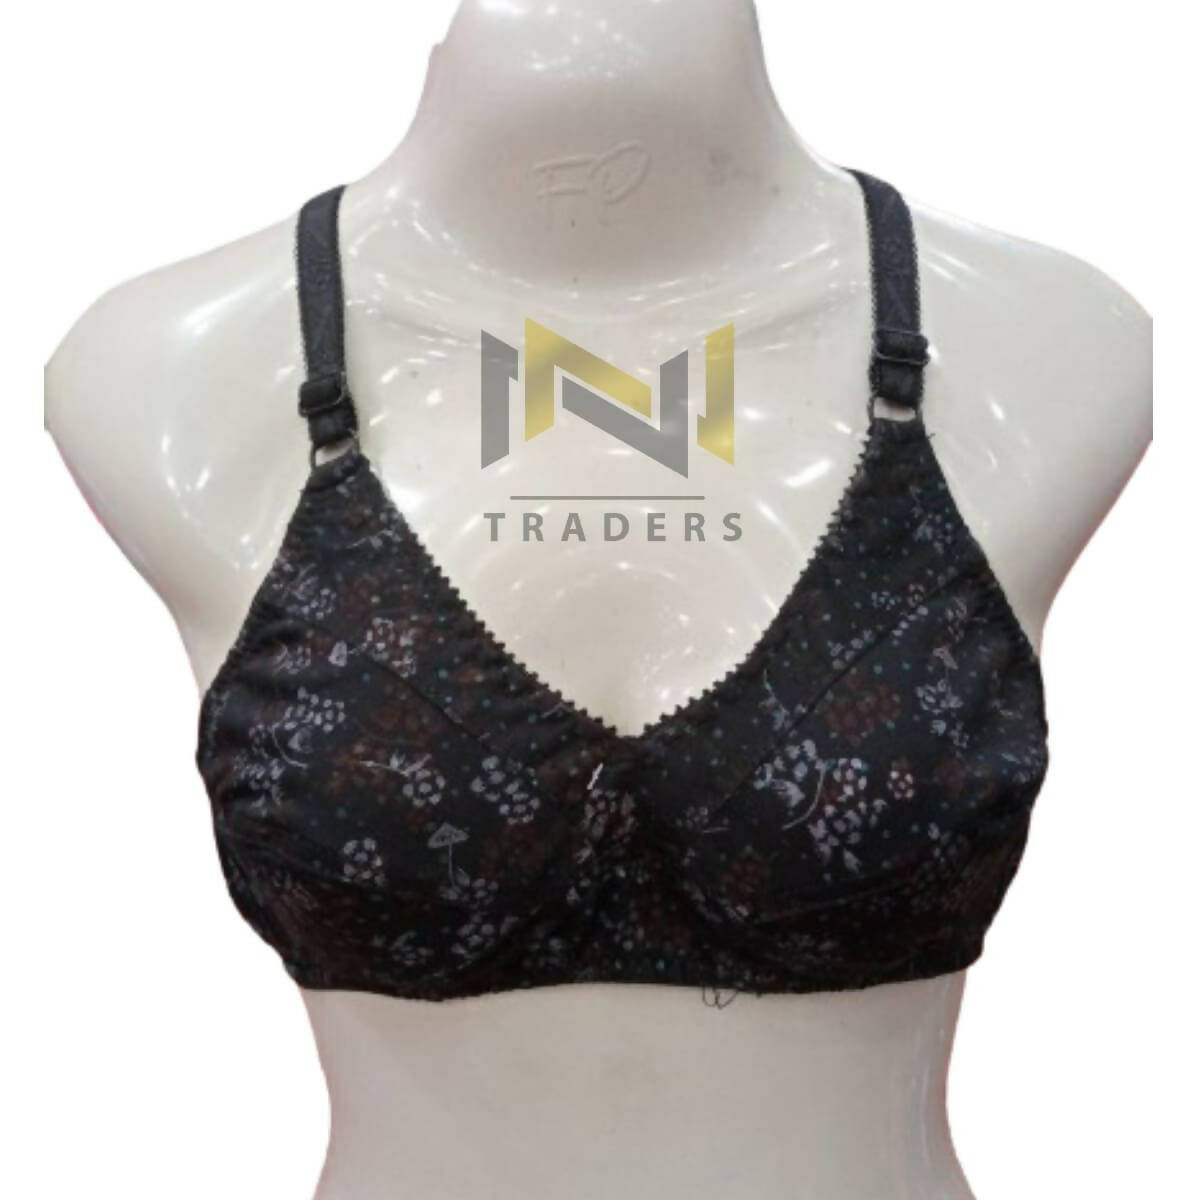 Printed Comfortable Non Padded Summer Stuff Bra For Women, Bras For Girls Brassiere Smooth & Stretchable Fabric